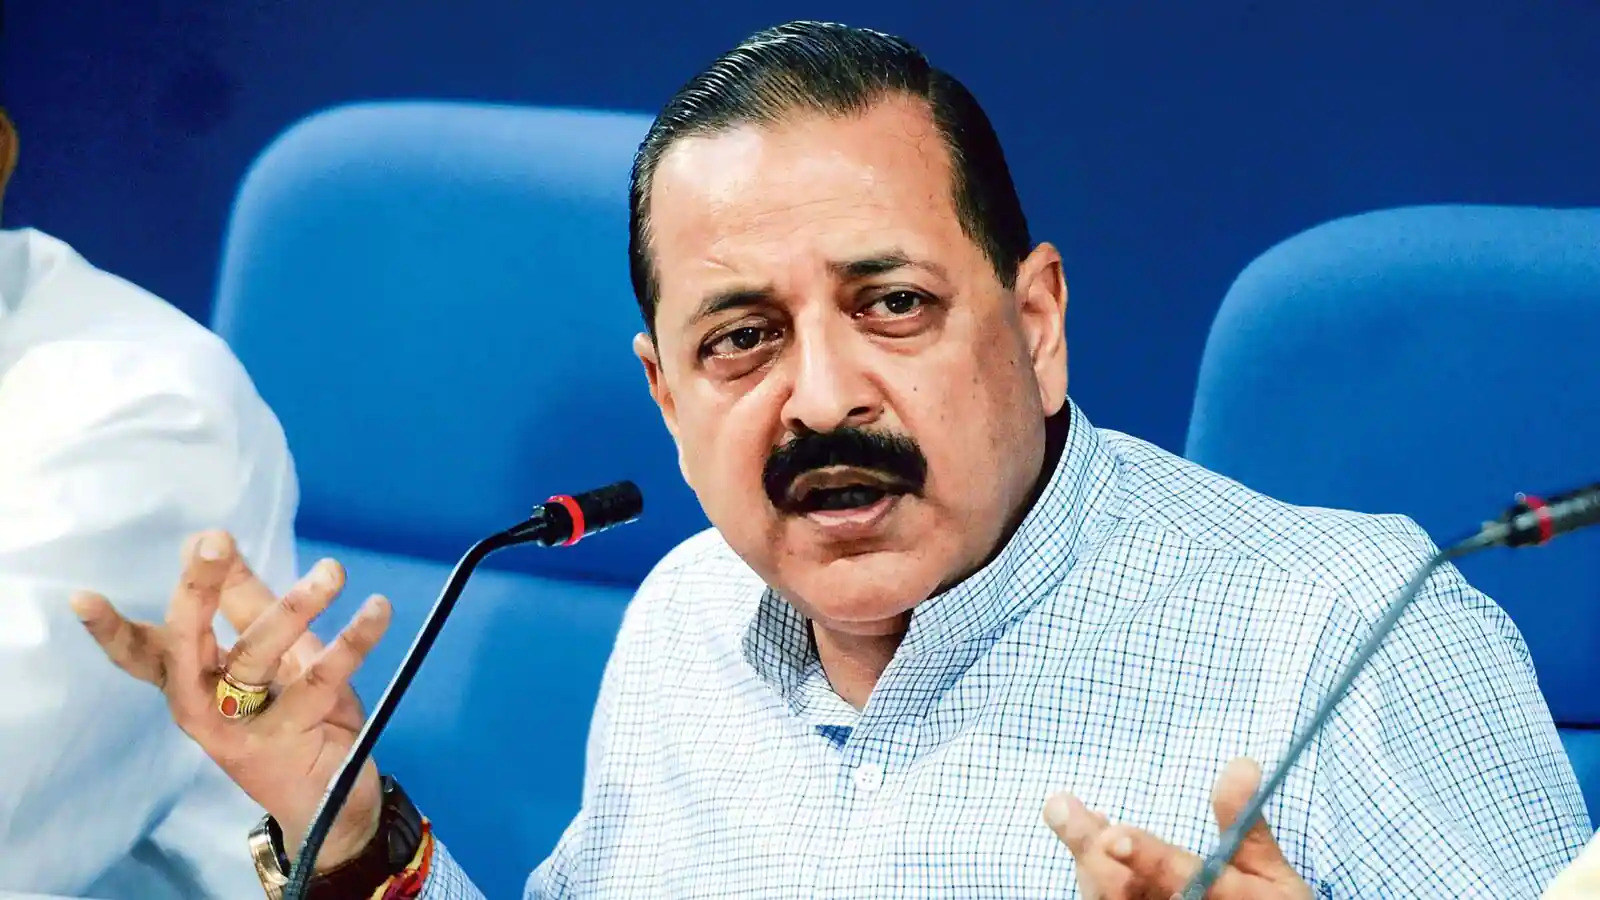 Through Rozgar Mela, 1.47 lakh new candidates are recruited into govt services says Dr. Jitendra Singh